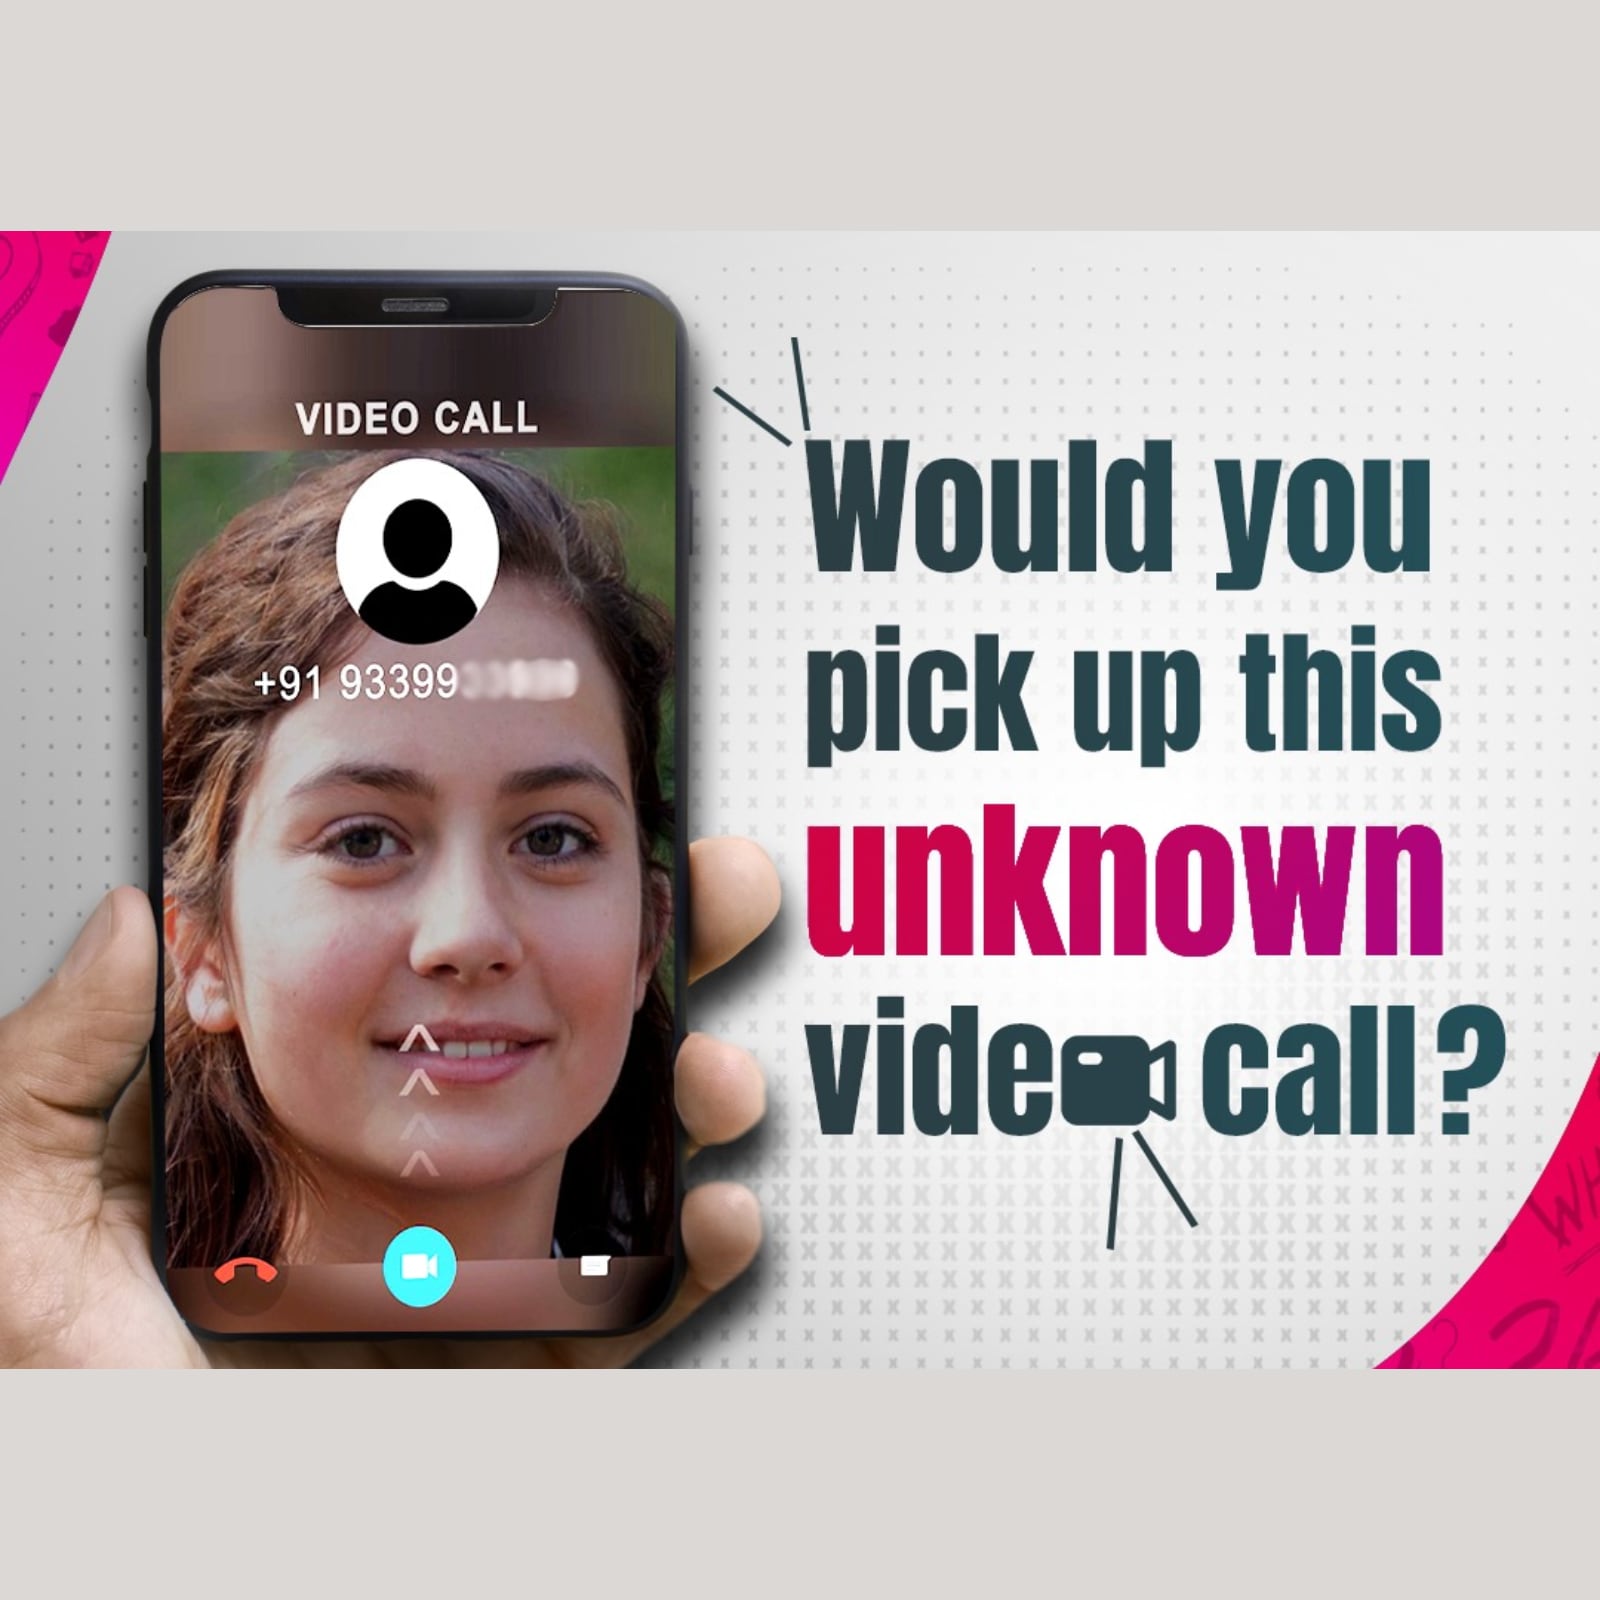 Indian Mobile Whatsapp Sex Mms - Online Scam That Takes Place On Video Call: Here's How It Works And How To  Stay Safe - News18